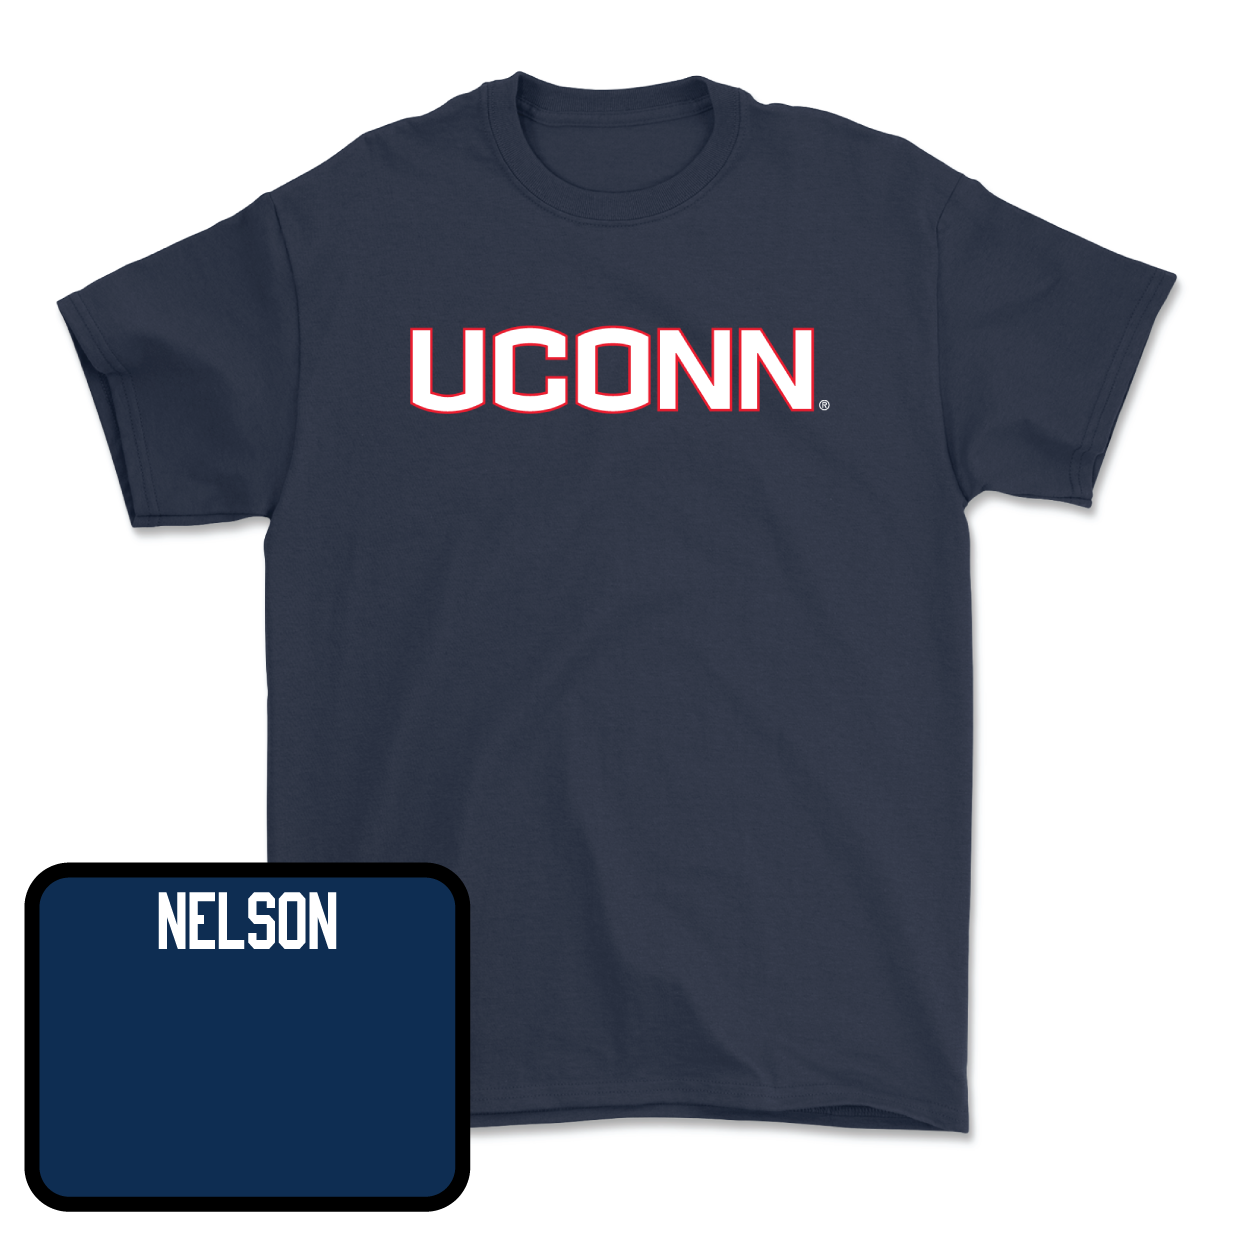 Navy Men's Golf UConn Tee Youth Large / Jared Nelson | #